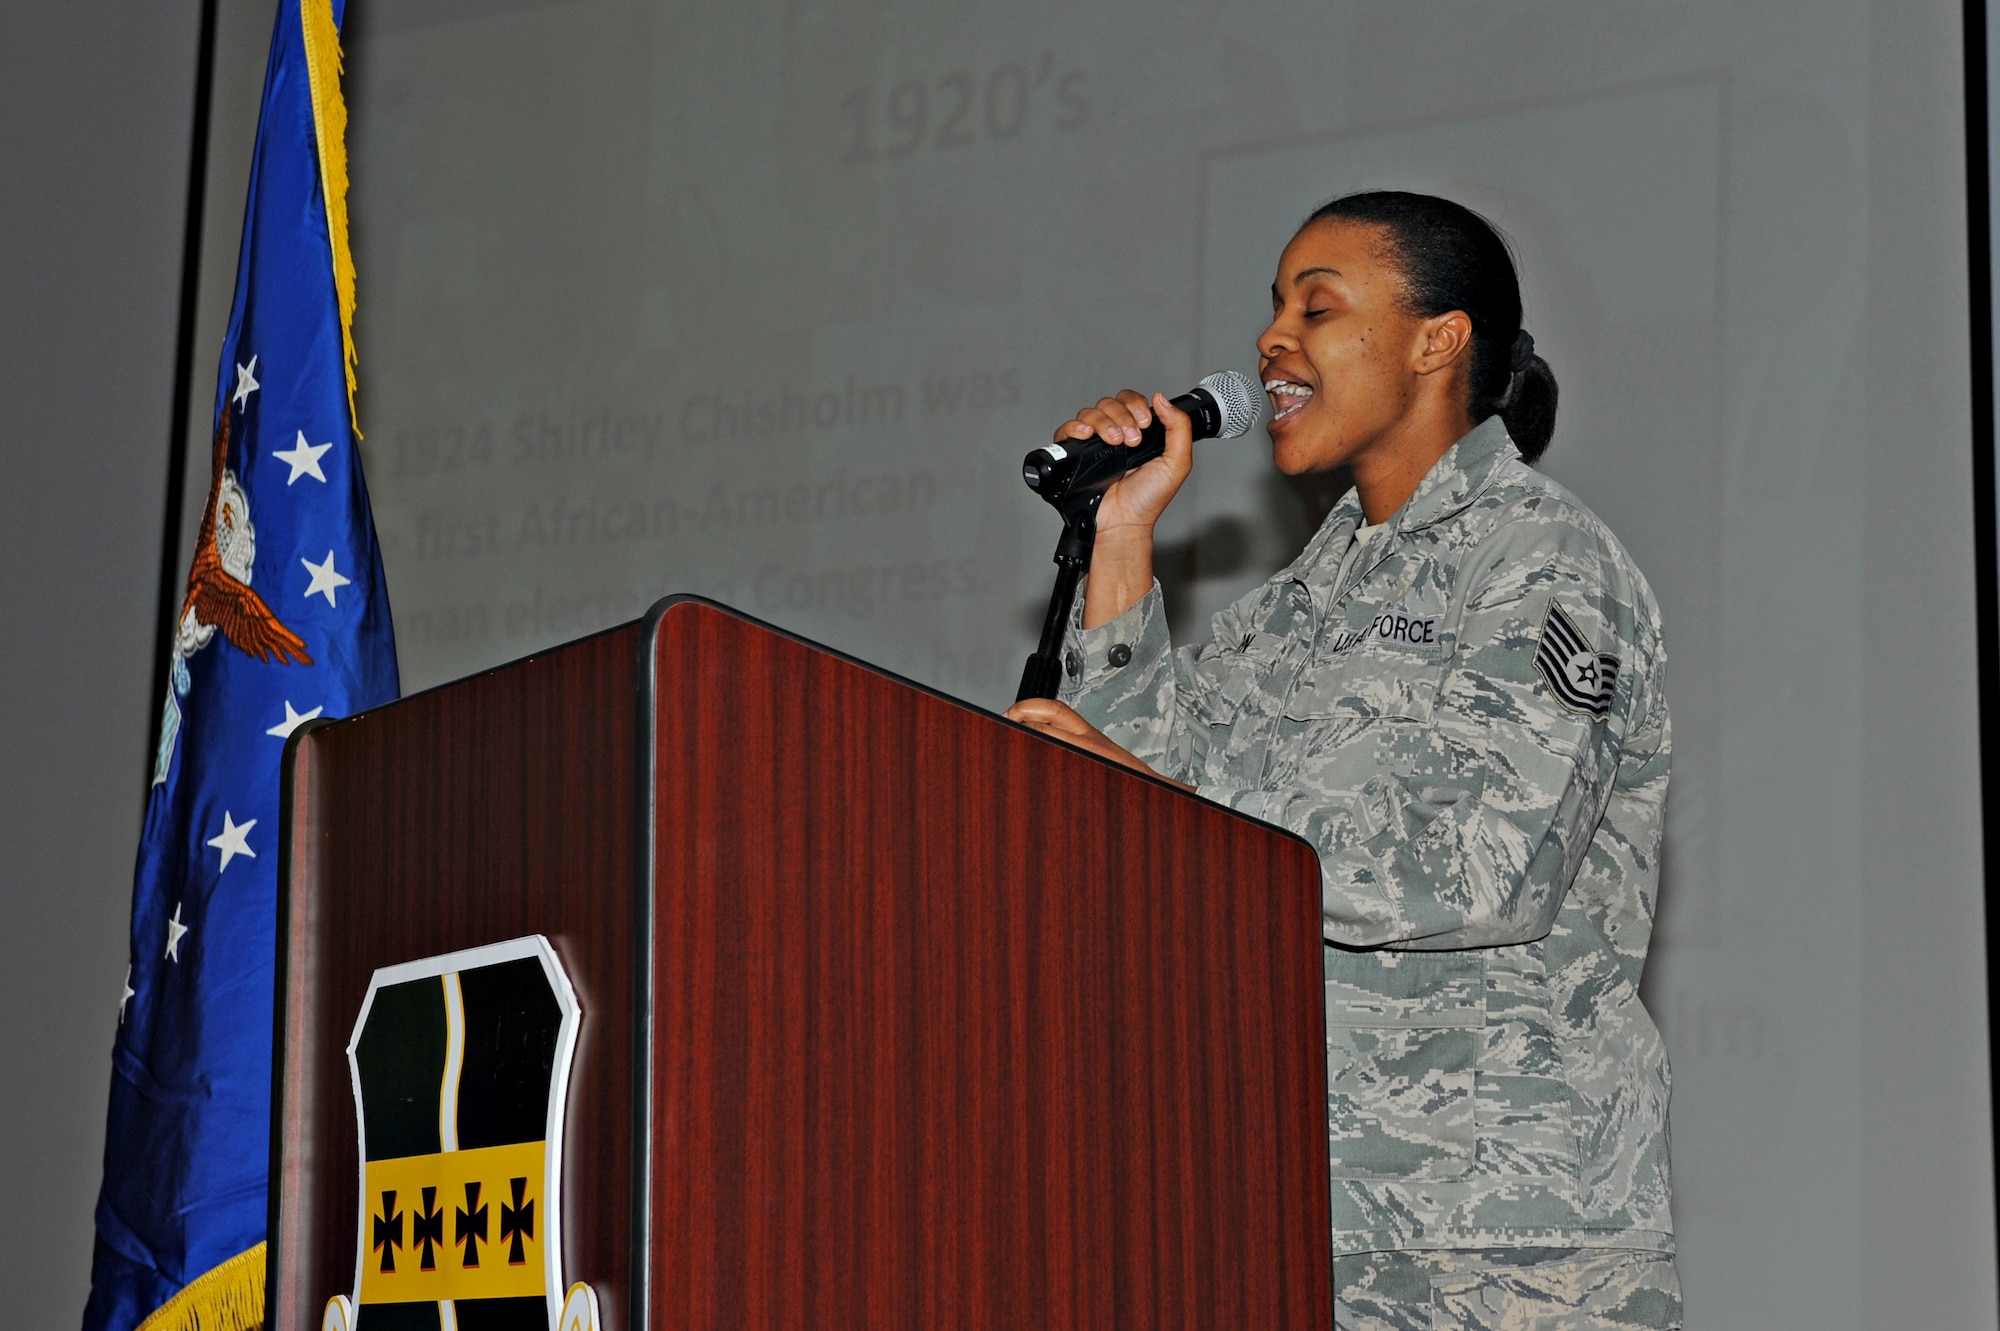 Tech. Sgt. Roxanne Weldon, Black History Month Committee member, performs a musical solo during the Black History Month Luncheon Feb. 24, 2015, at Beale Air Force Base, Calif. The event was held to recognize the achievements made by African Americans in U.S. history. (U.S. Air Force photo by Airman 1st Class Ramon A. Adelan/Released)